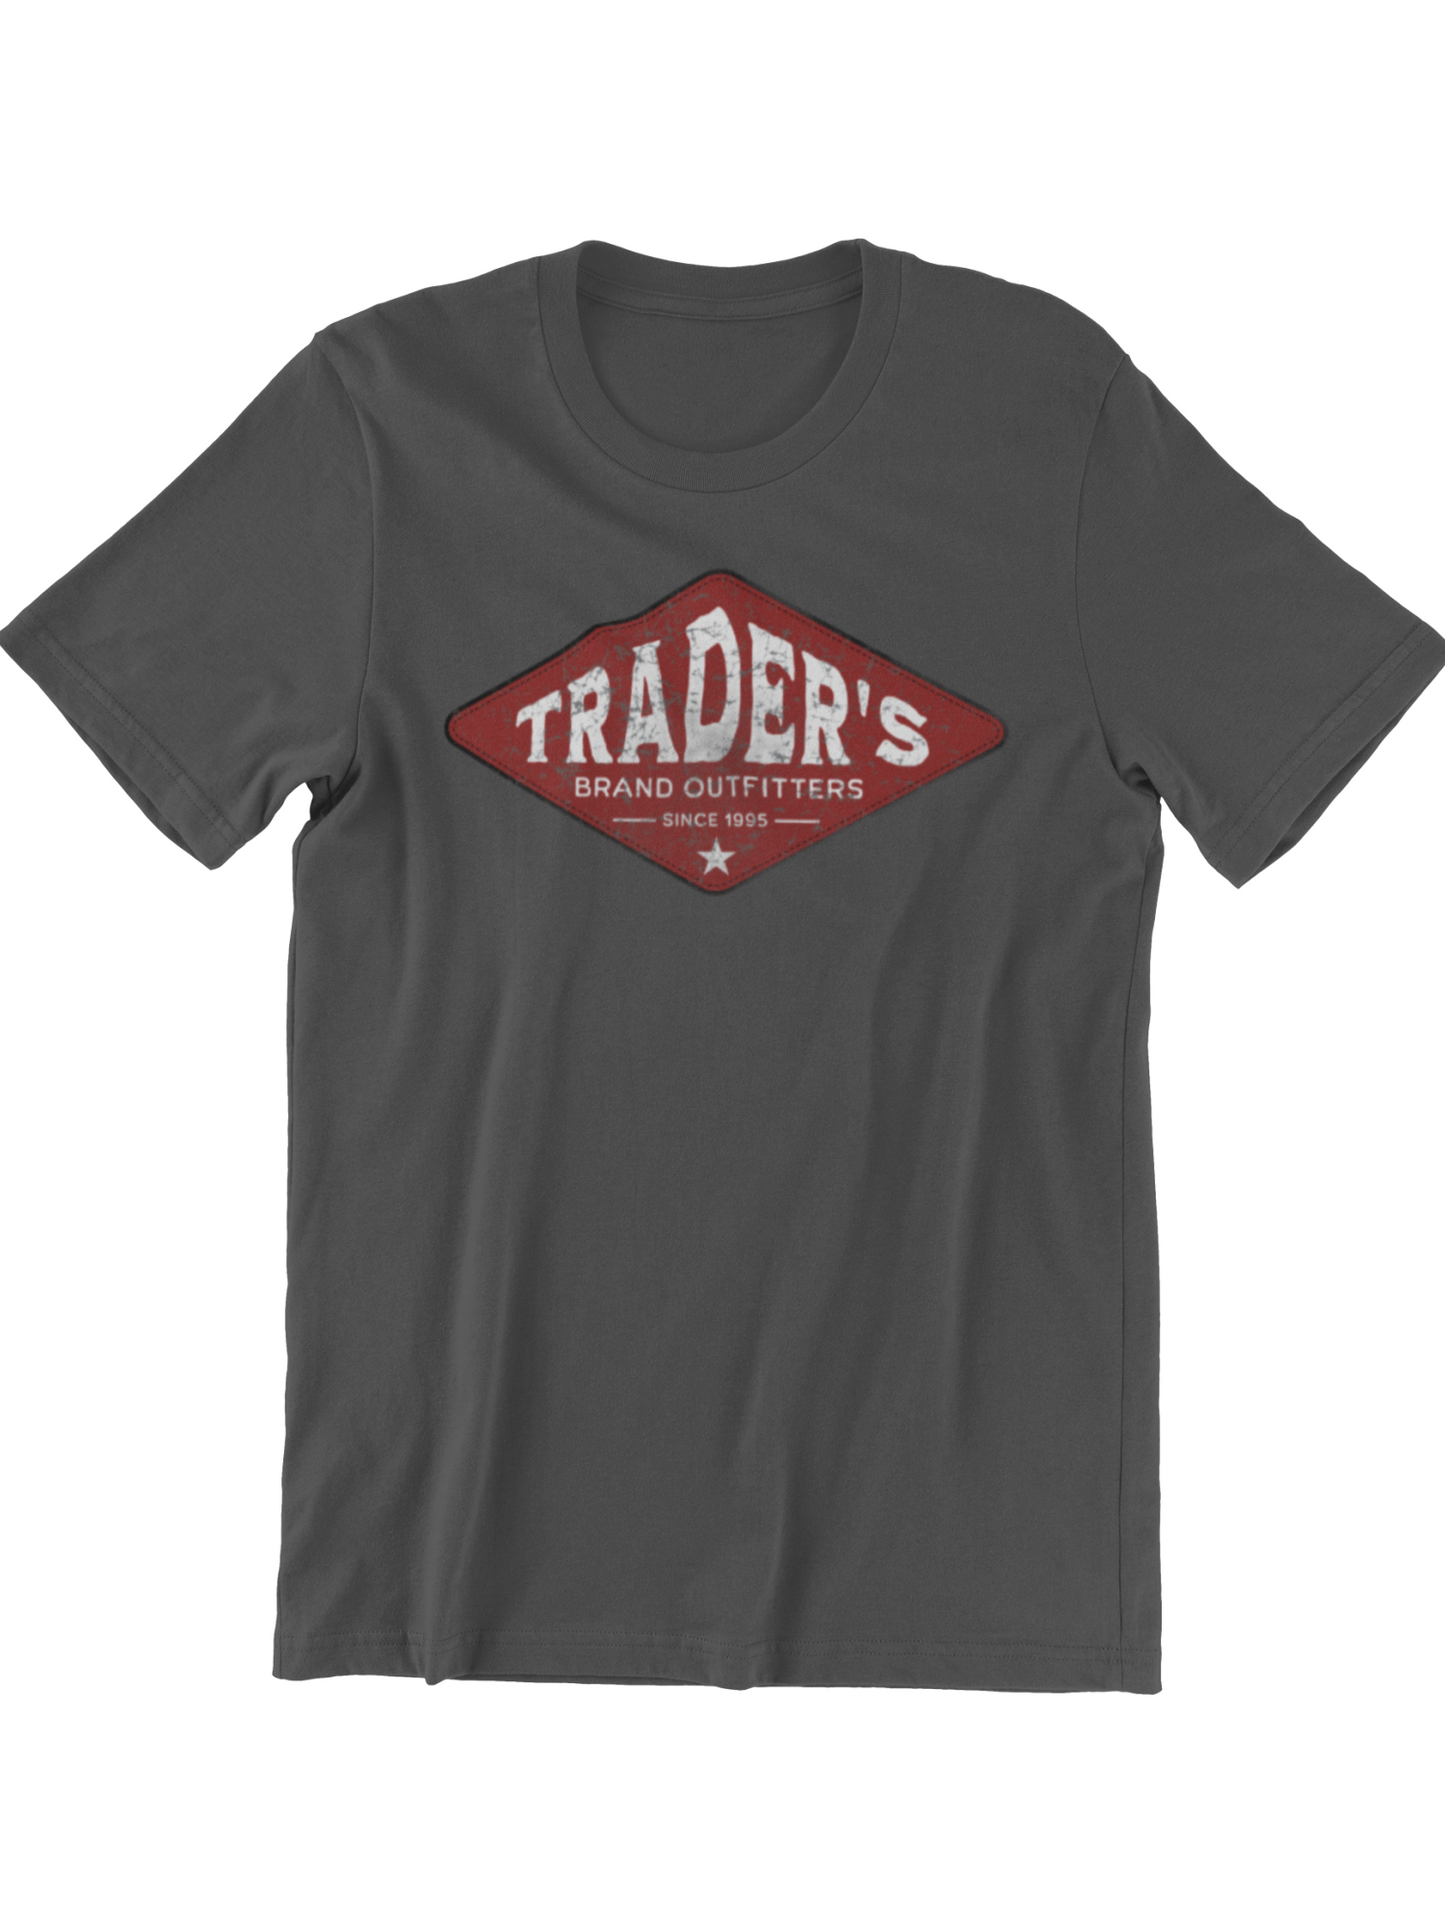 NEW! Limited Edition Tee - Trader's Brand Merchants Since 1995